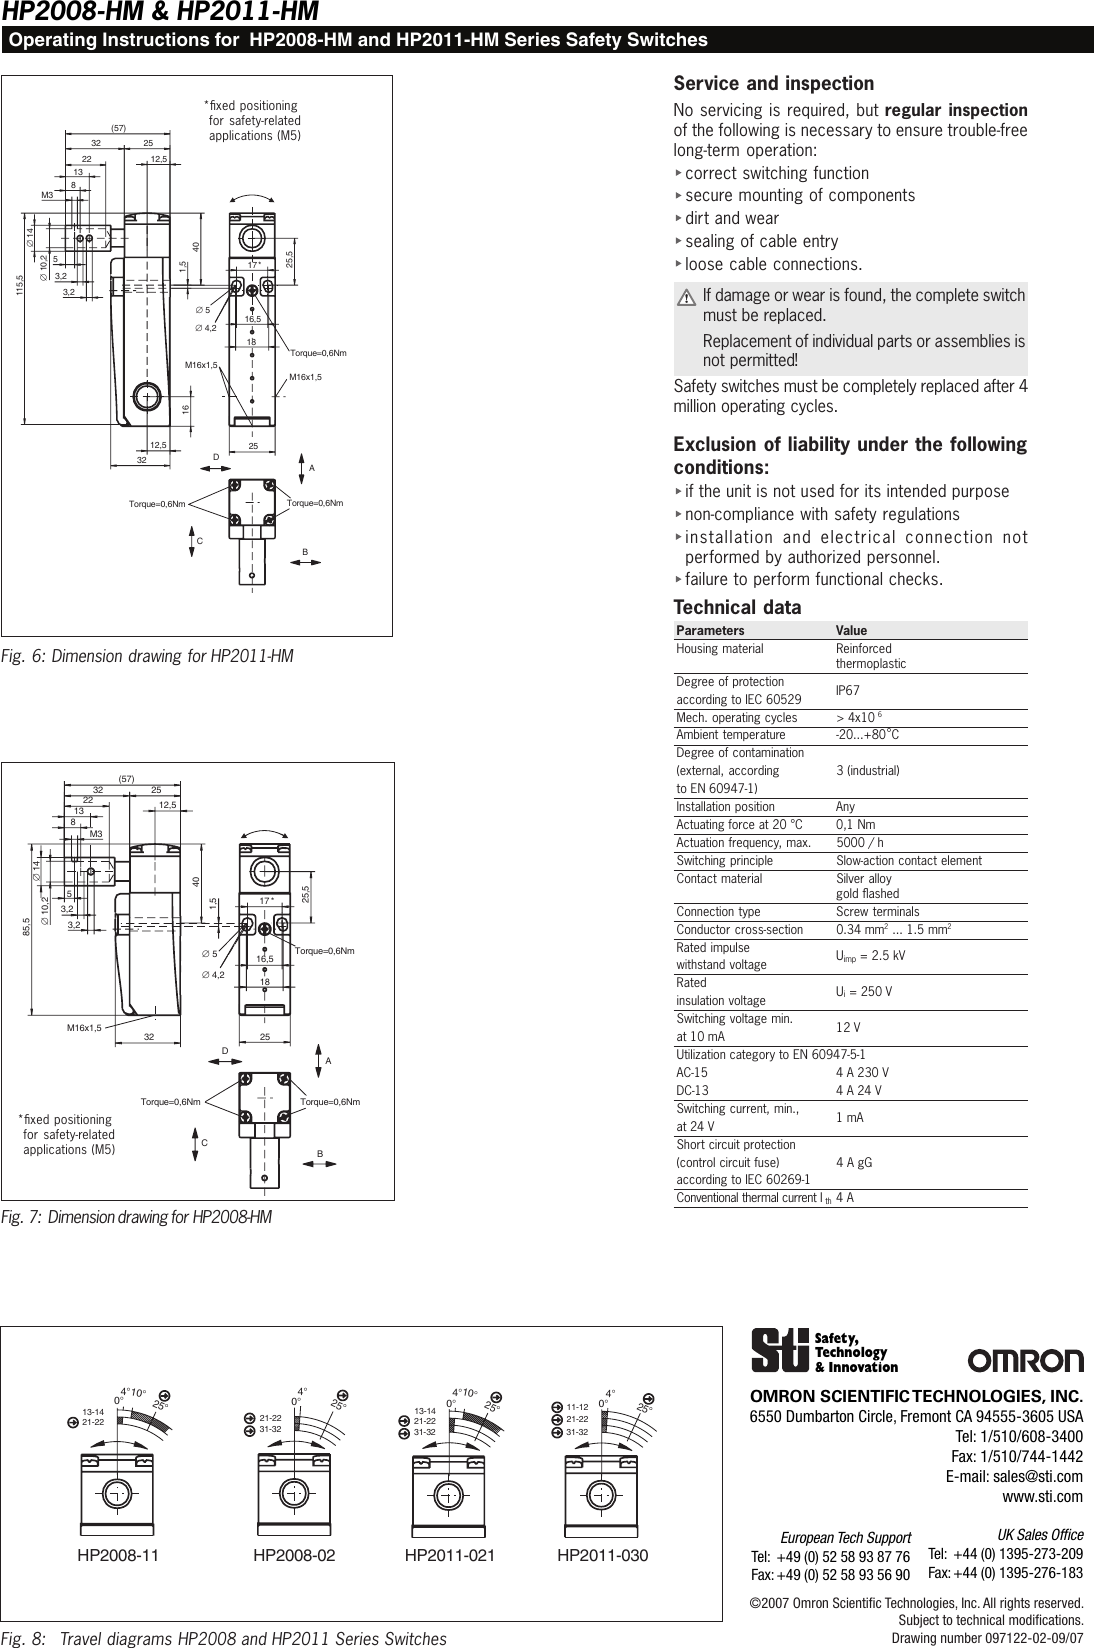 Page 2 of 3 - HP2011- HM Hinge-Operated Safety Interlock Switch Instruction Sheet Manual  HP2011-HM En 201507 C369I-E-01